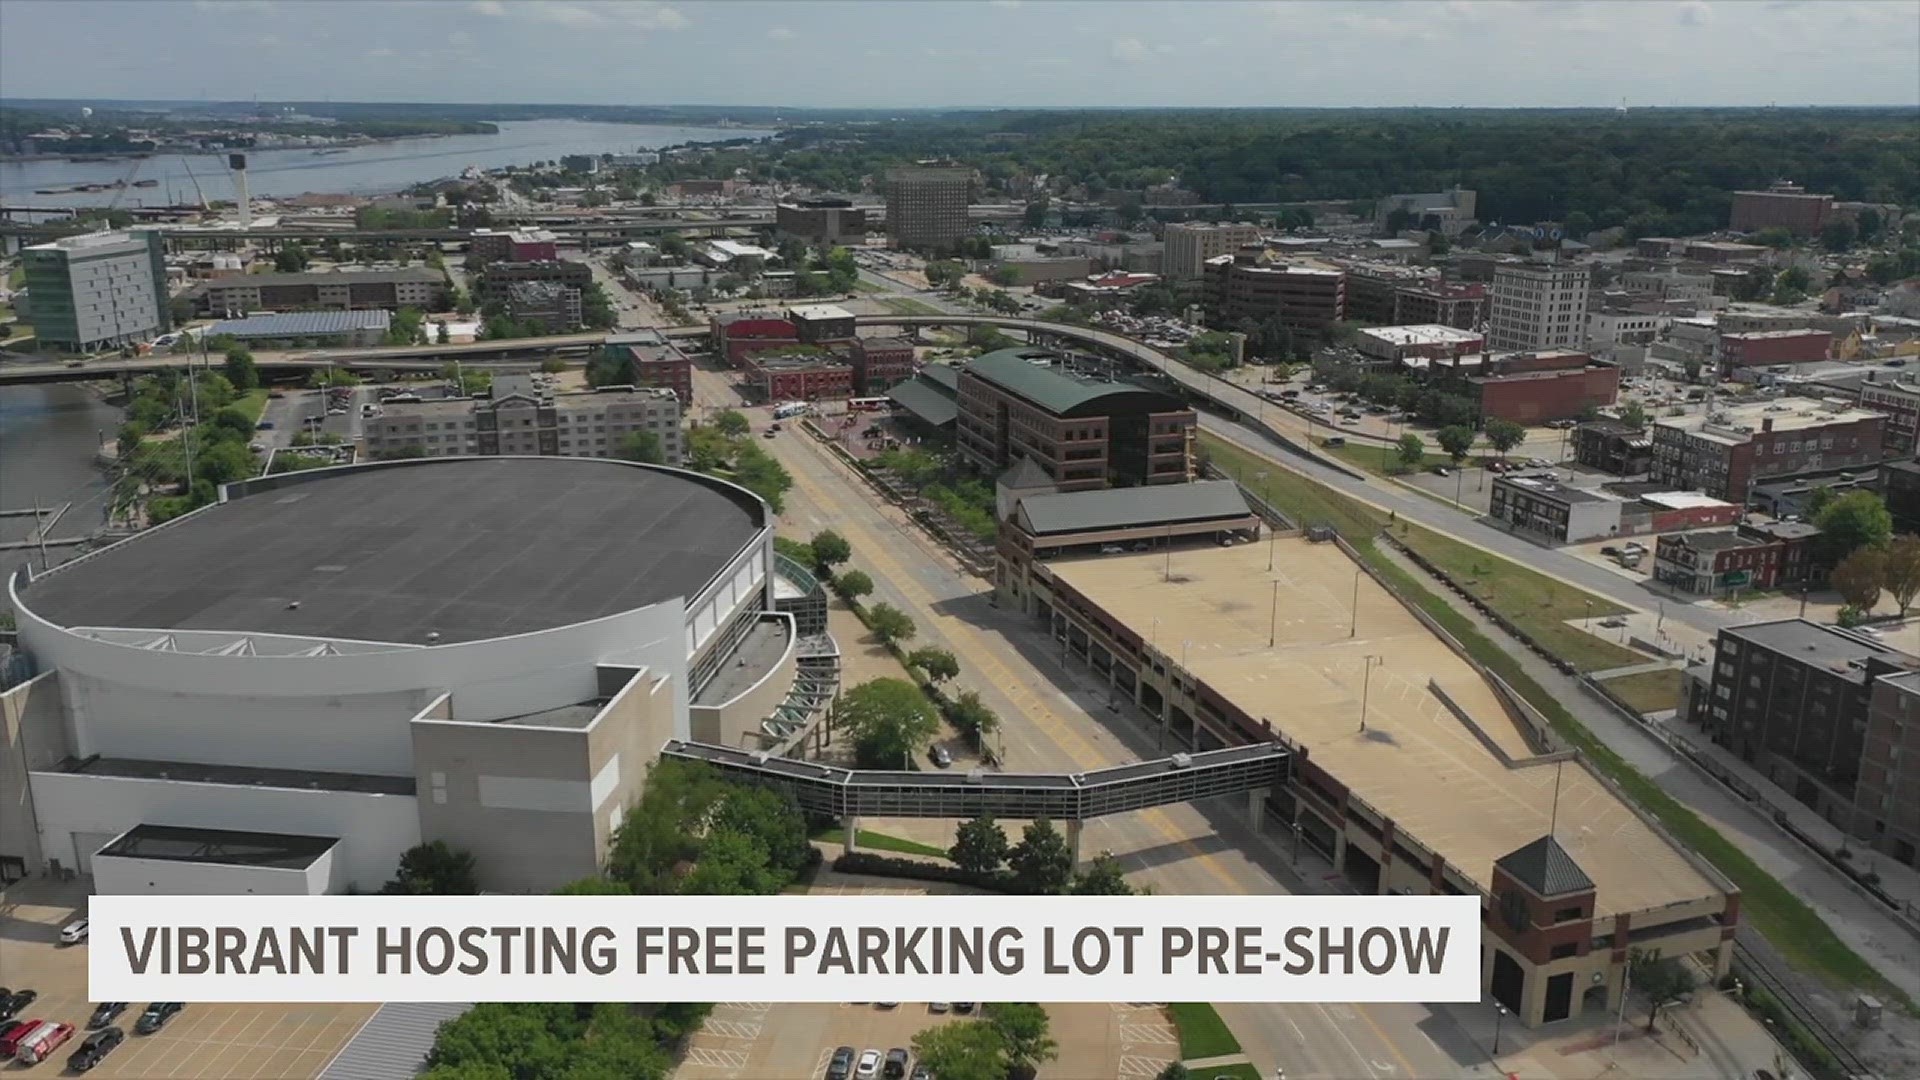 People are preparing for the crowds that are anticipated ahead of Morgan Wallen's concert this evening. Some will attend a pre-show party in the parking lot.